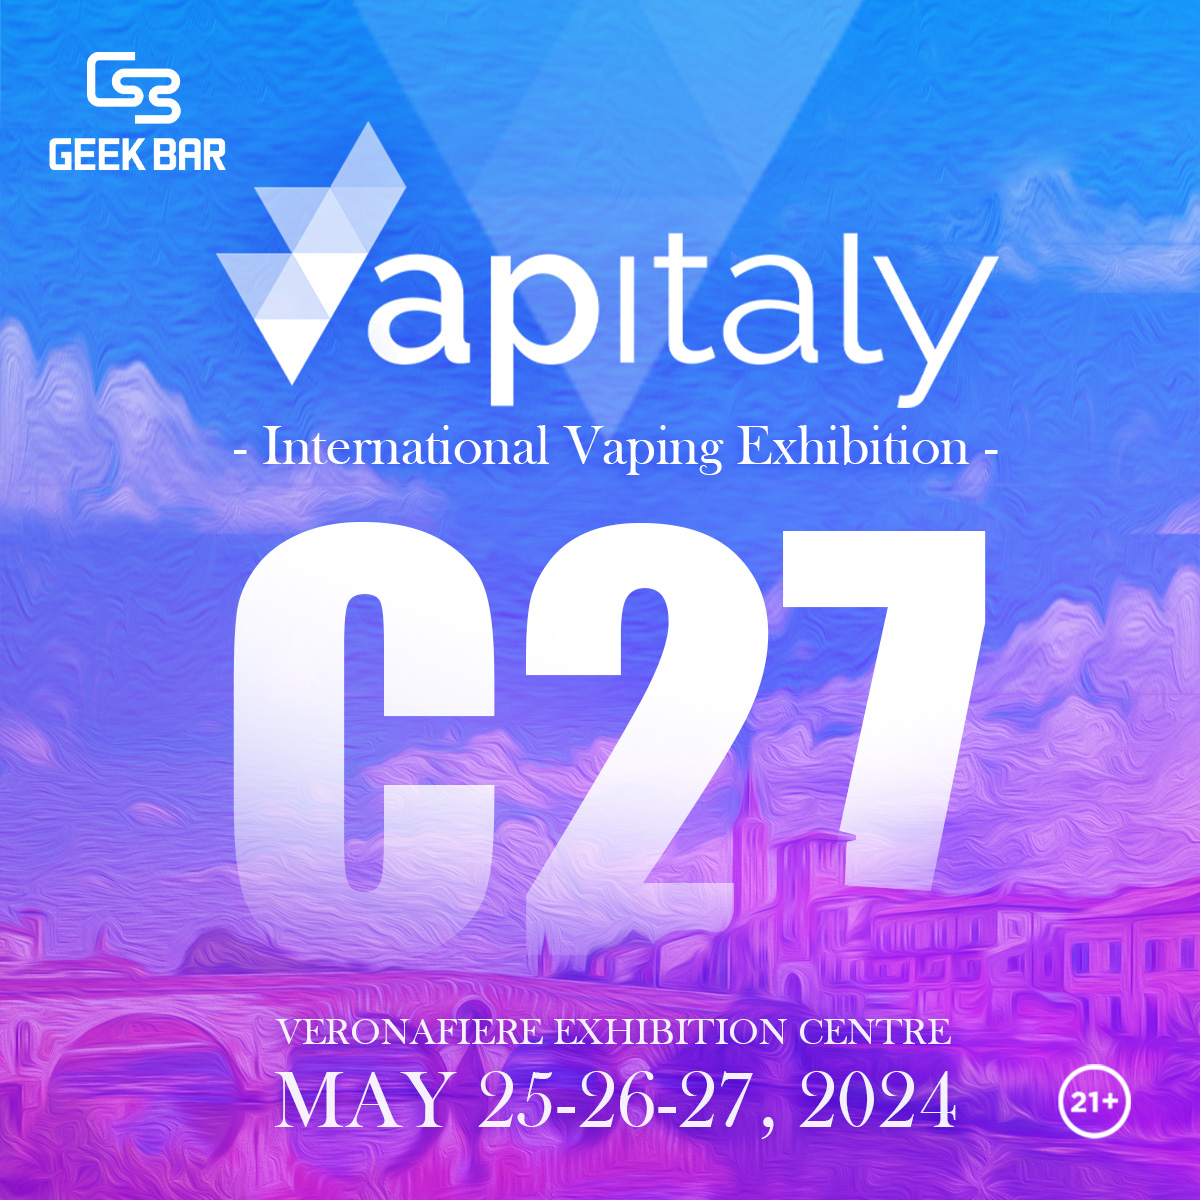 Get ready to ignite your senses at the International Vaping Exhibition!
 Join us at C27 Booth for an electrifying experience like no other!
🧲Location: Veronafiere Exhibition centre.
🕛Time： 25th - 27th May/2024
#geekbar #InternationalVapingExhibition